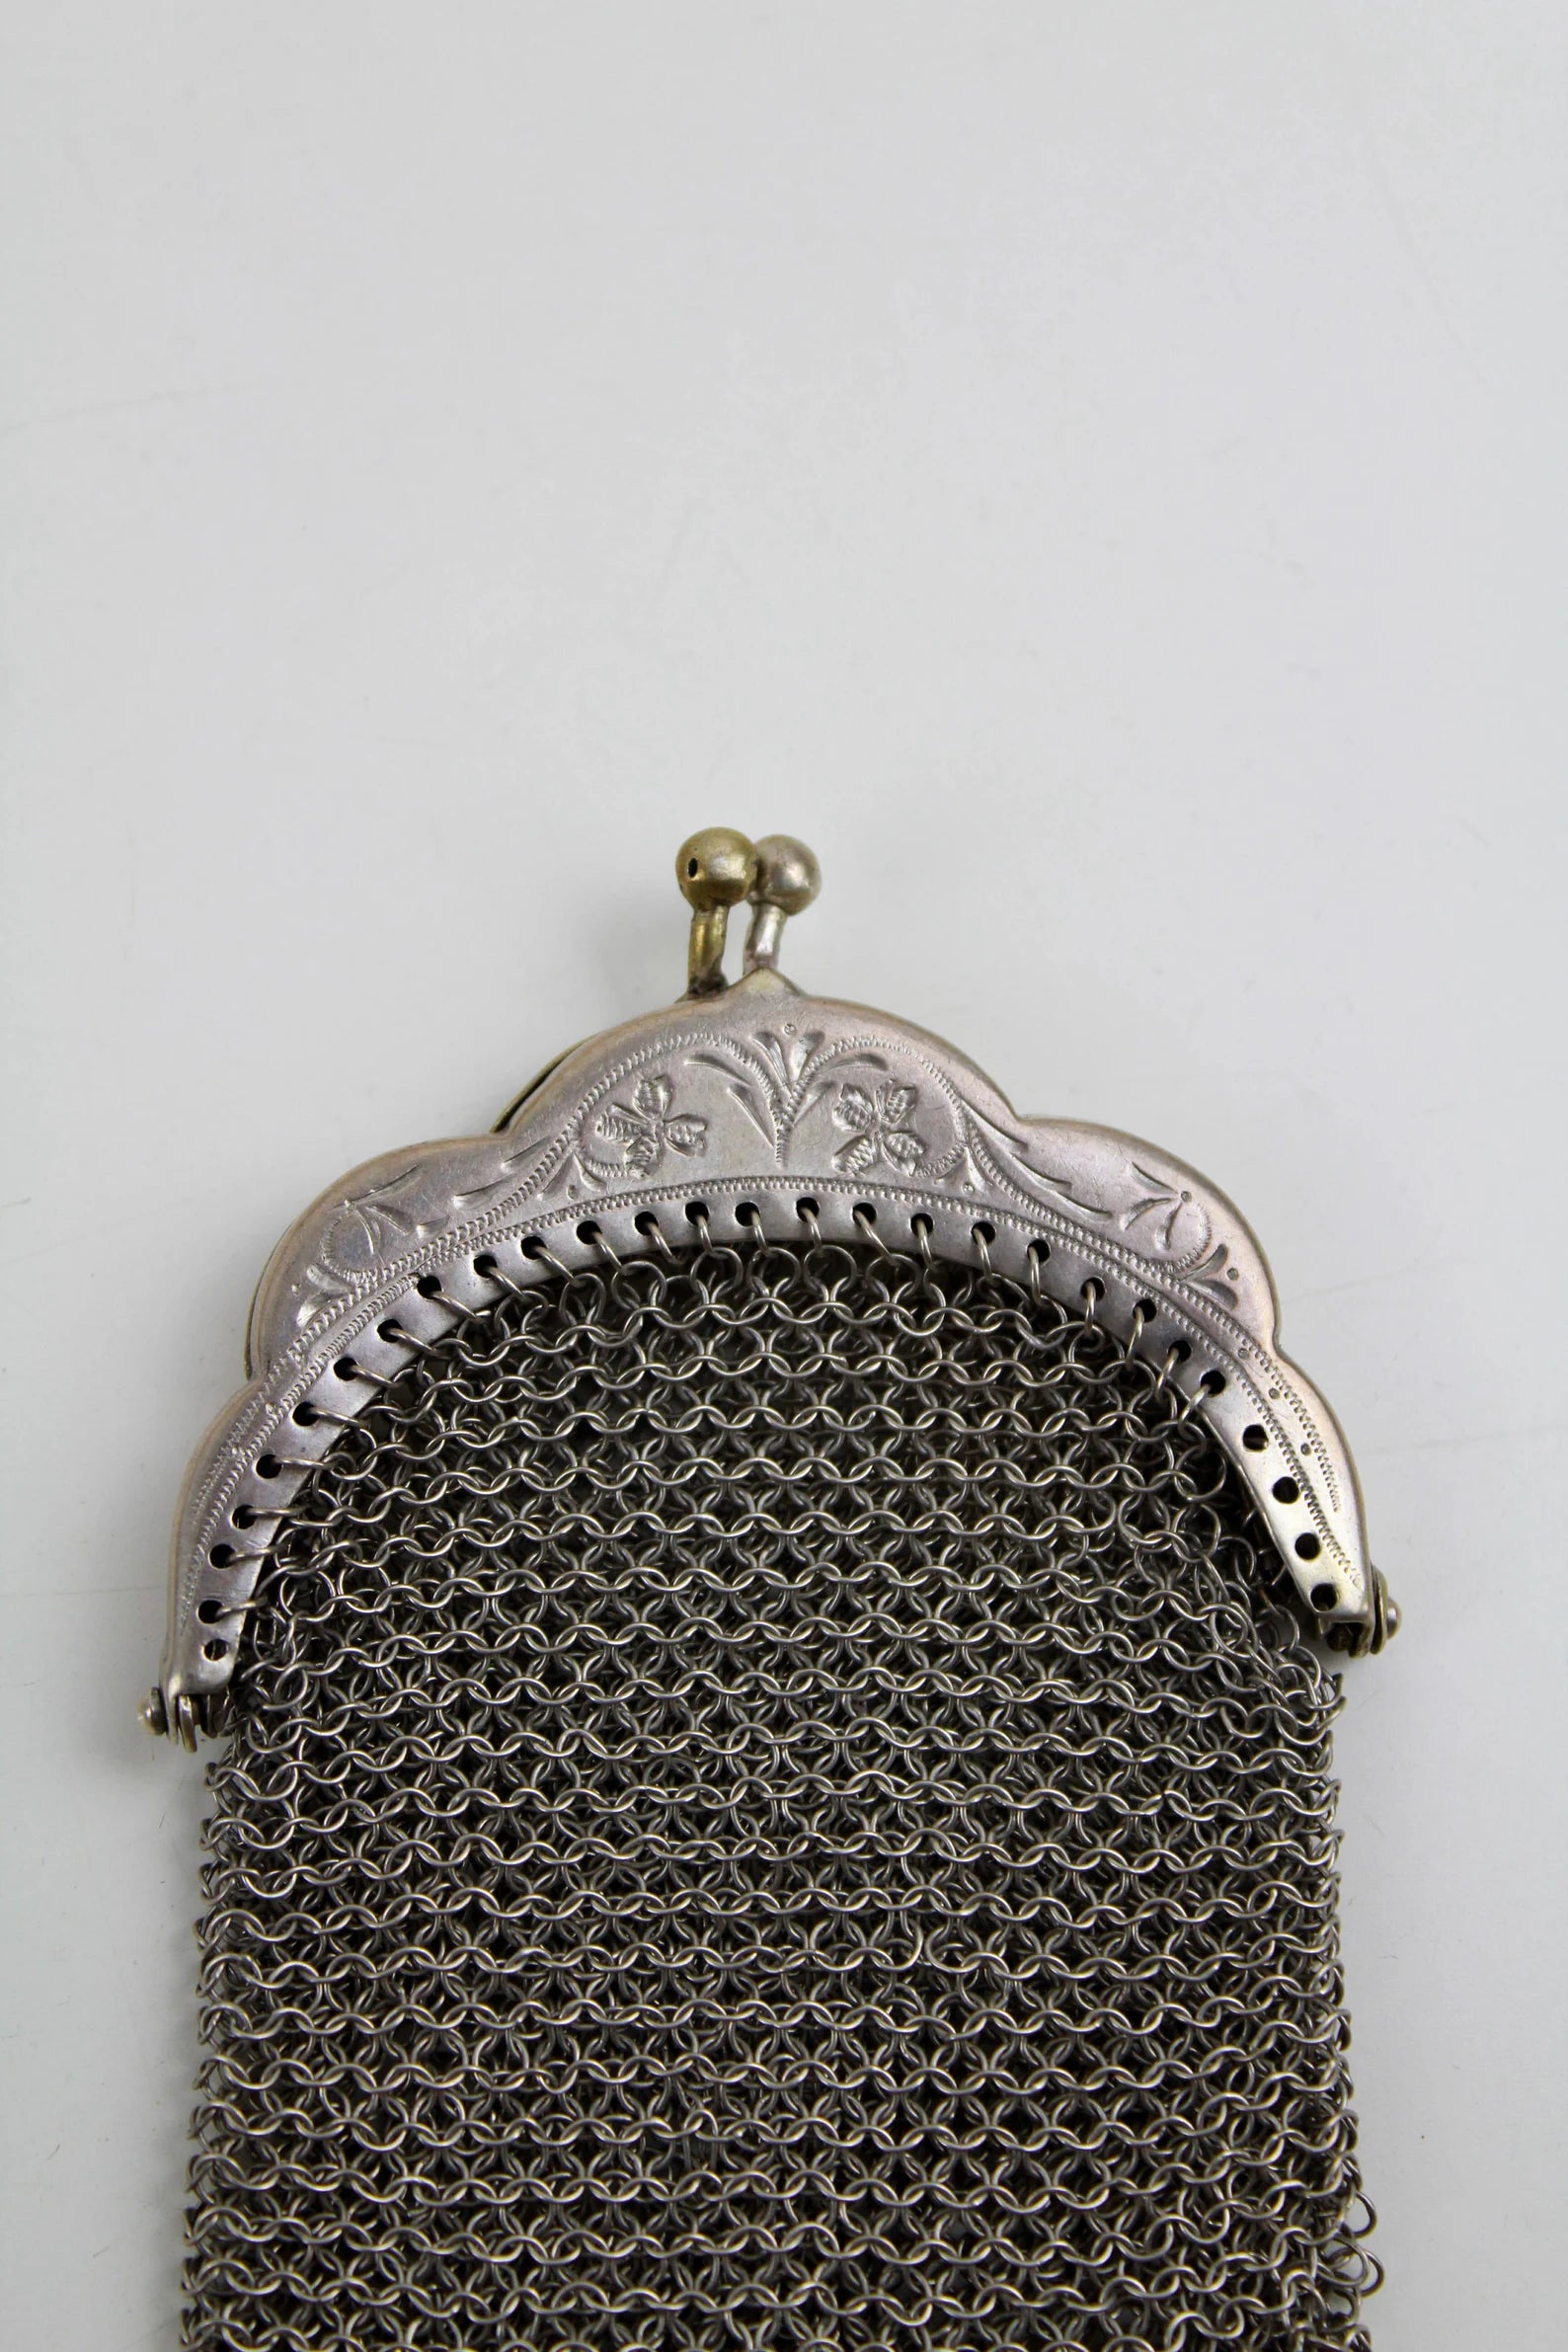 Vintage Sterling Silver Engraved Coin Purse With Chain 43428